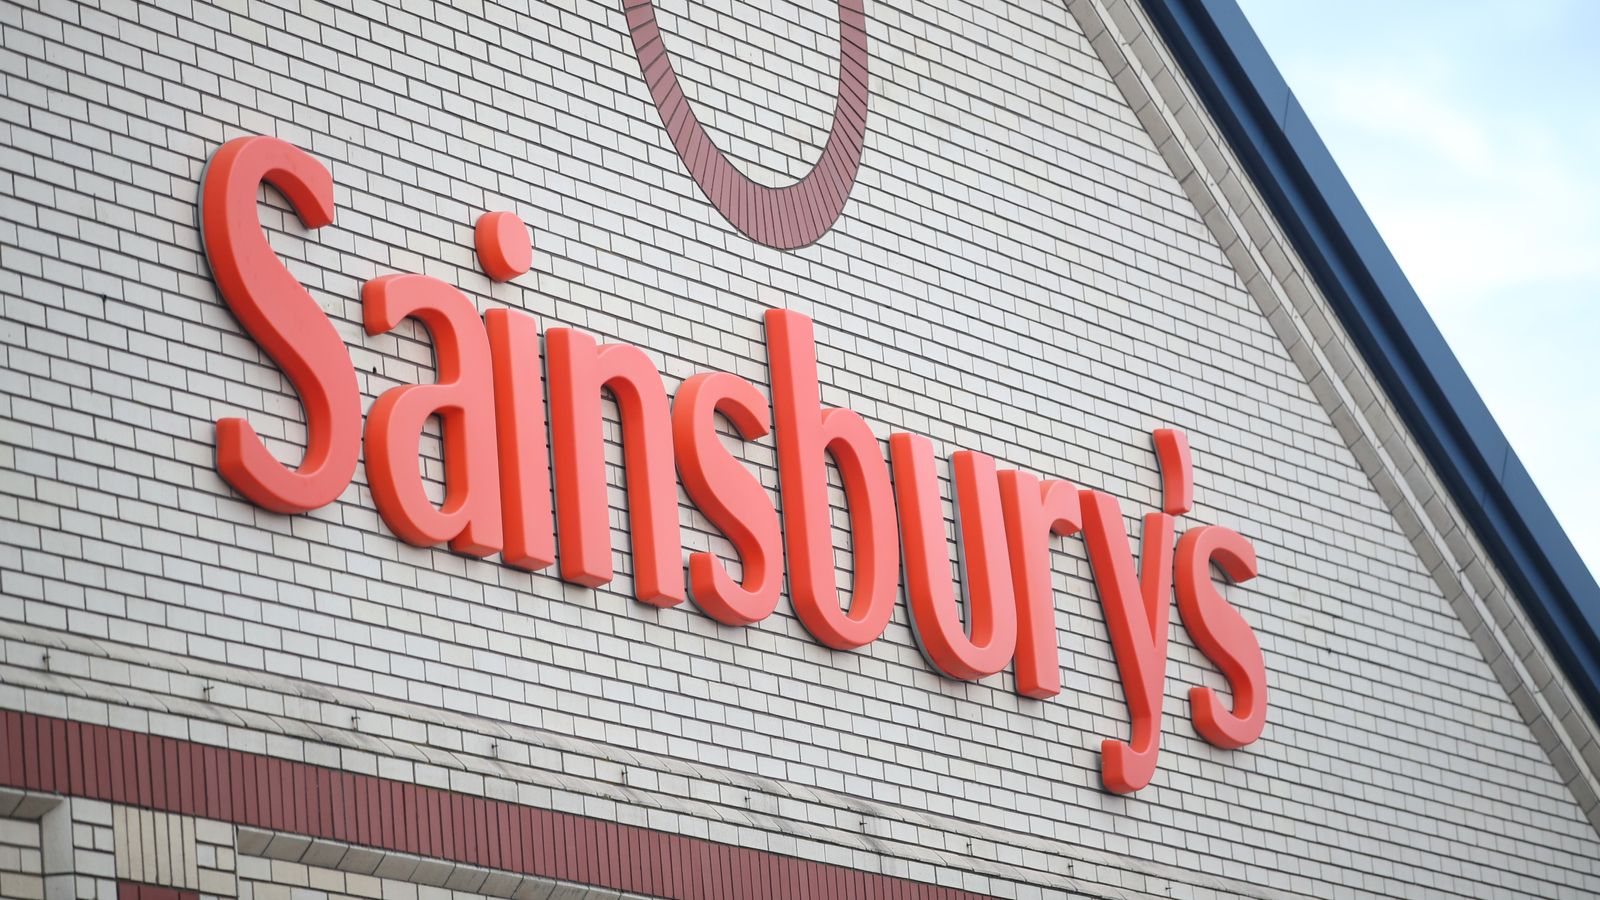 Sainsbury's to cut 1,500 jobs in cost-cutting plan